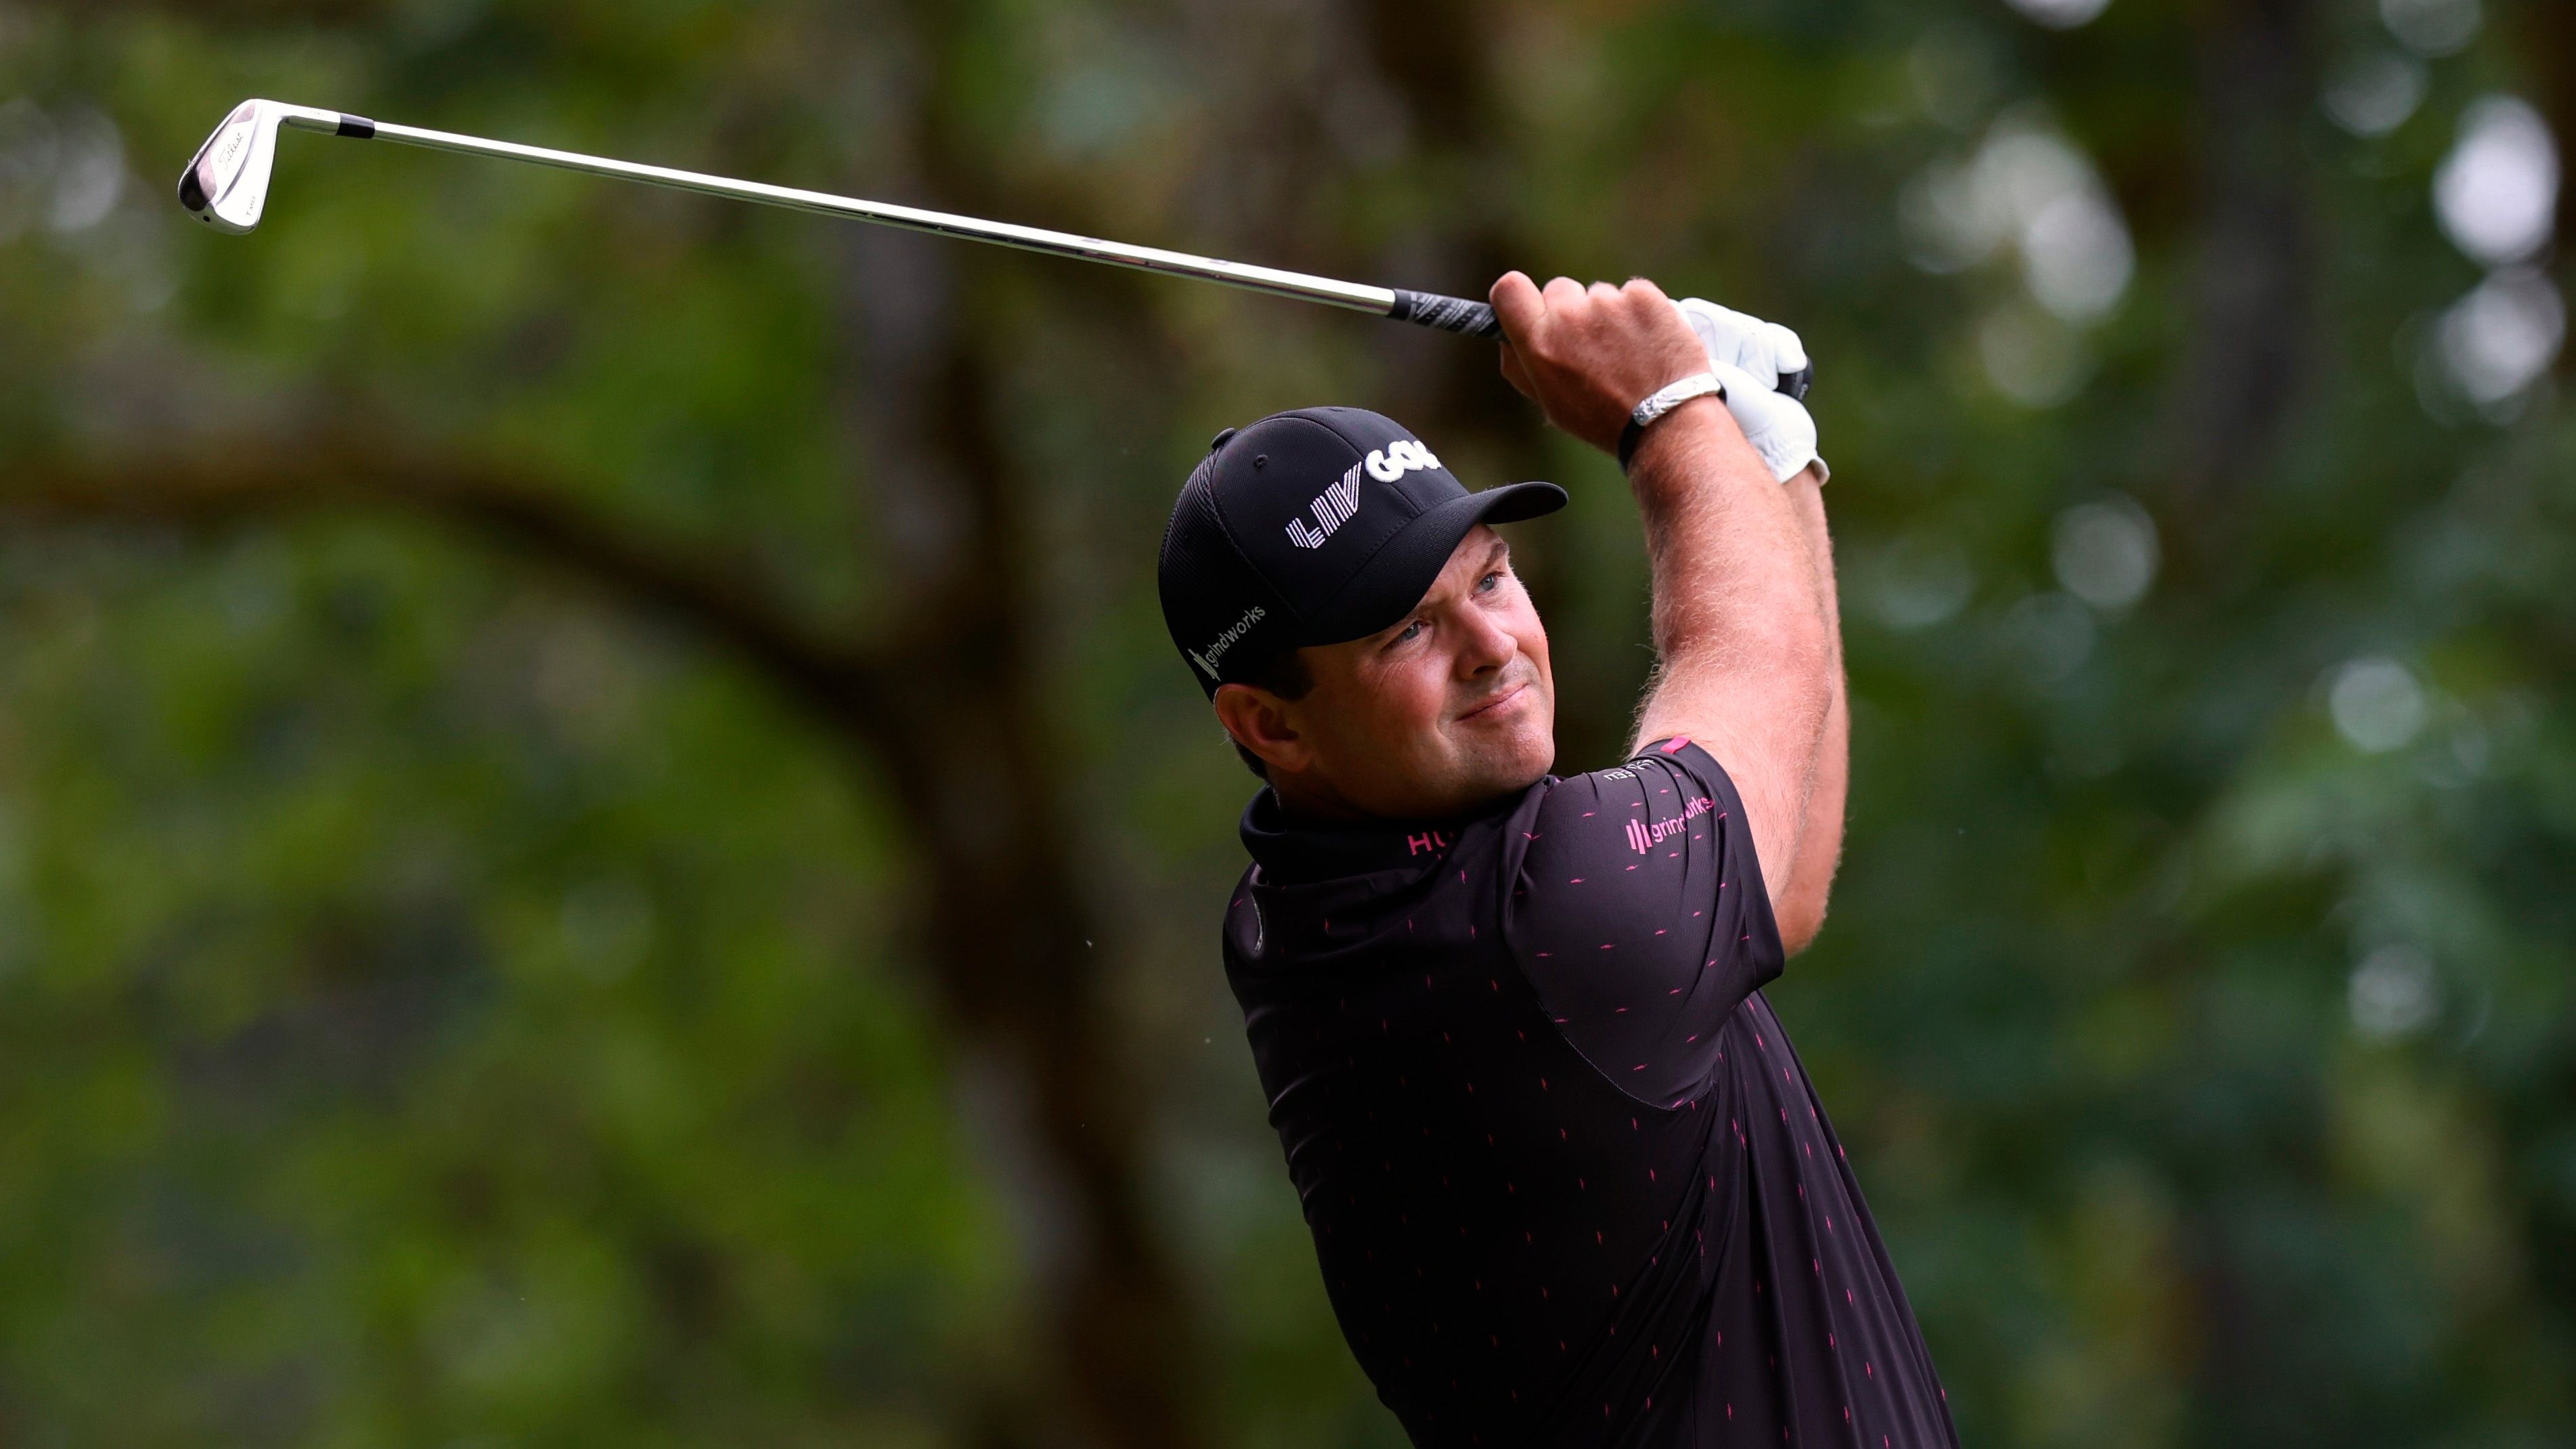 Patrick Reed watches his tee shot on the fourth hole during the third round of the Portland Invitational LIV Golf tournament. Photo: Steve Dipaola